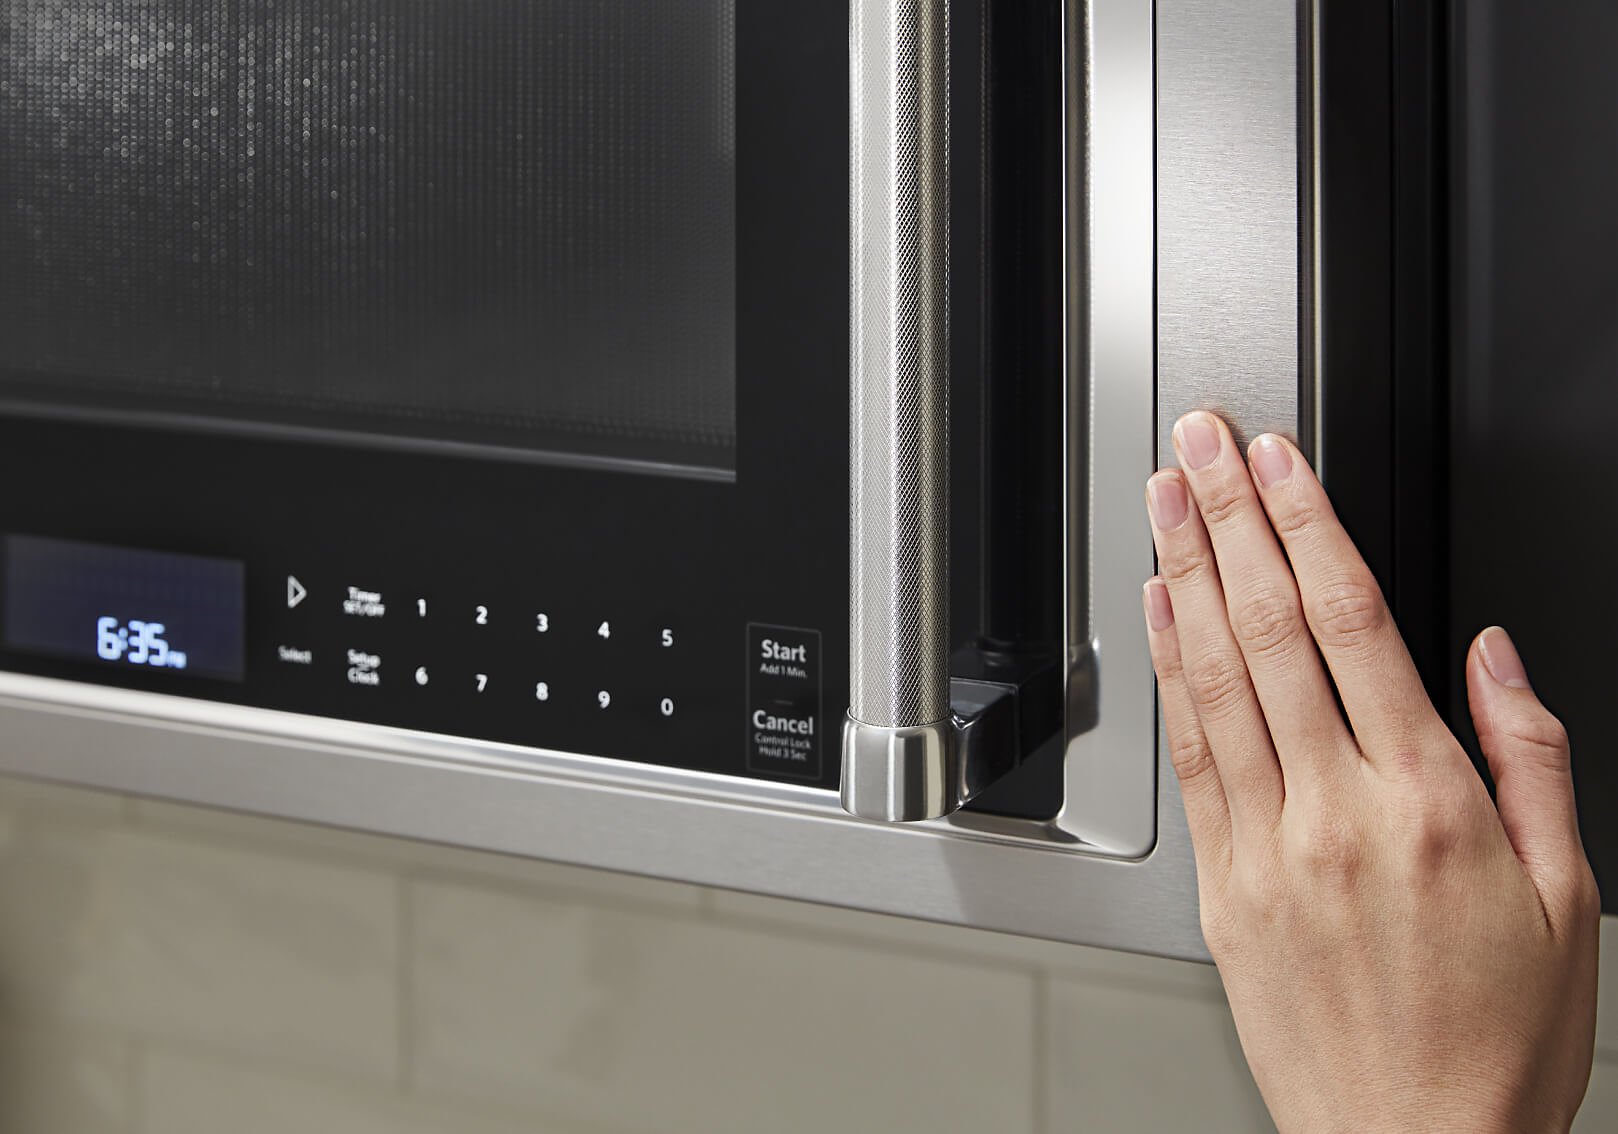 How to Clean a Microwave: Step by Step with Photos and Video